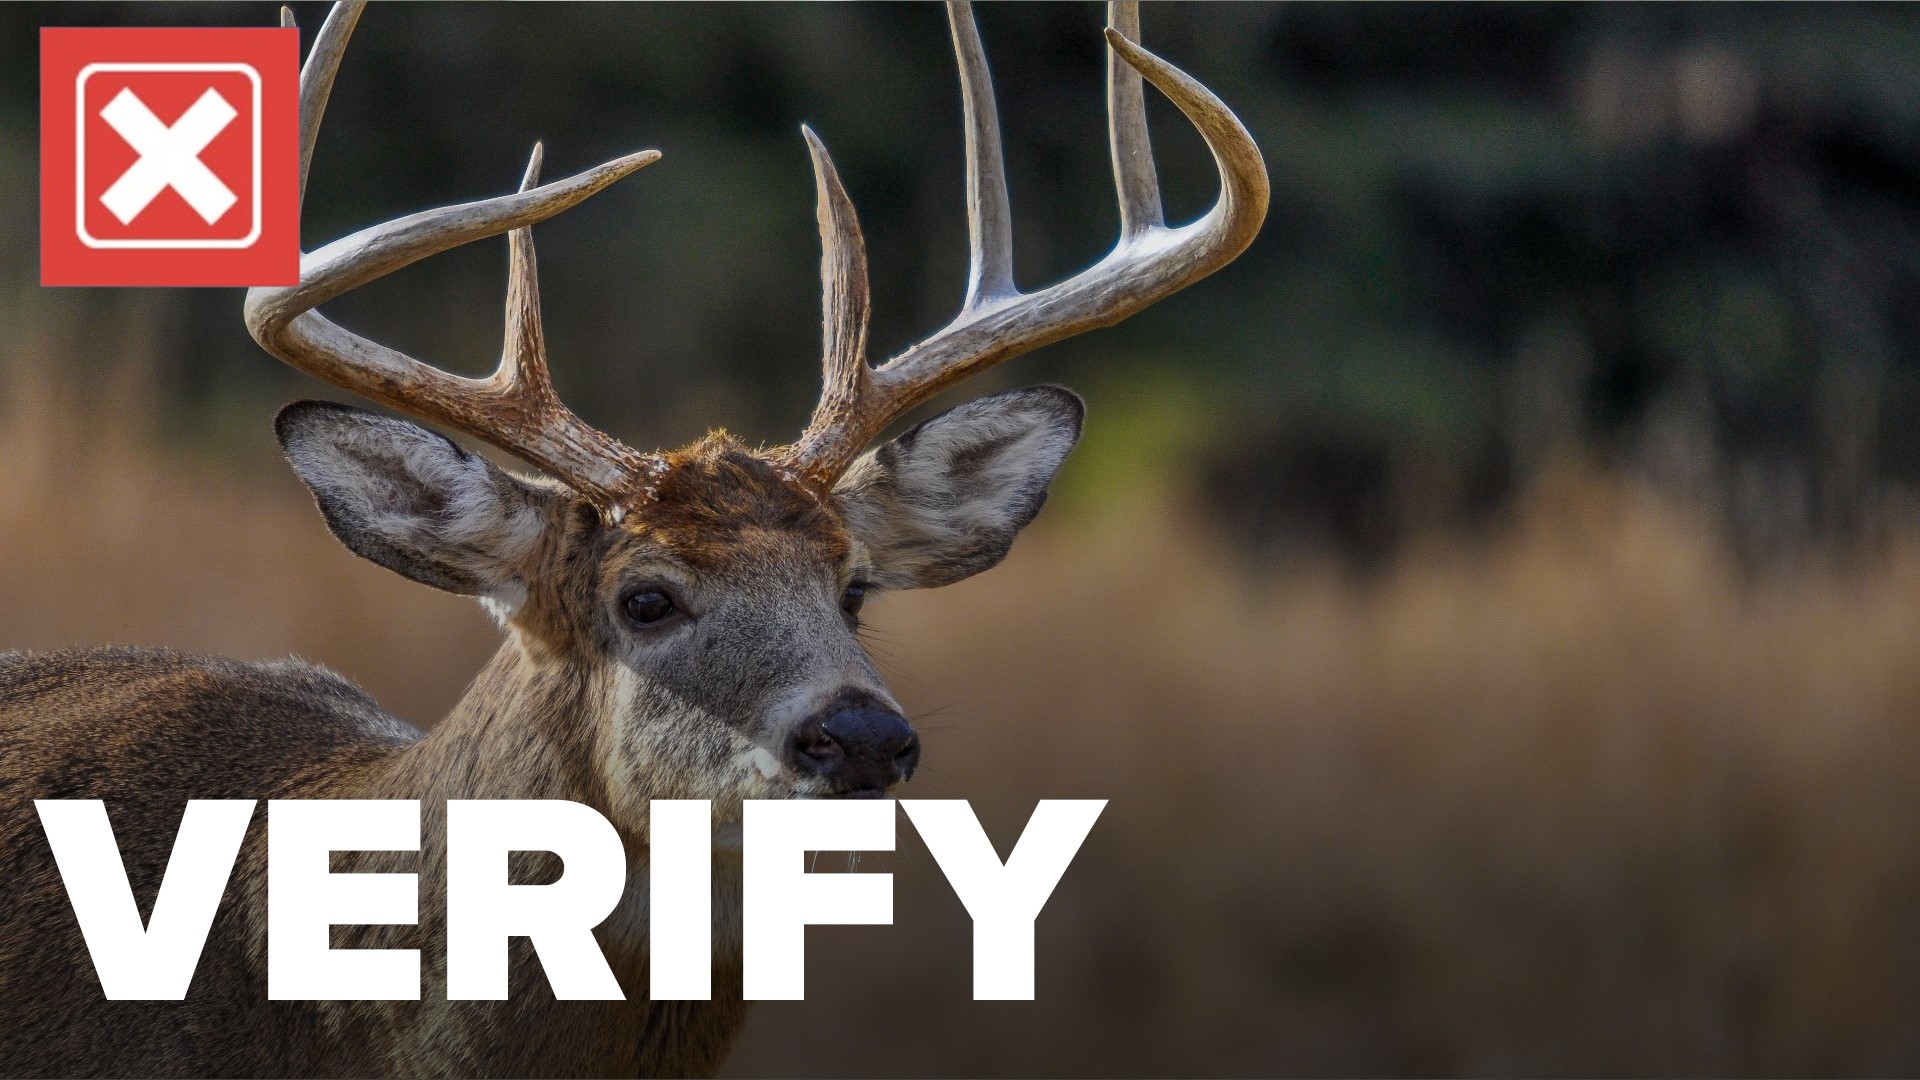 An NPR article suggested deer could carry SARS-CoV-2 and spread it to humans. We VERIFY.